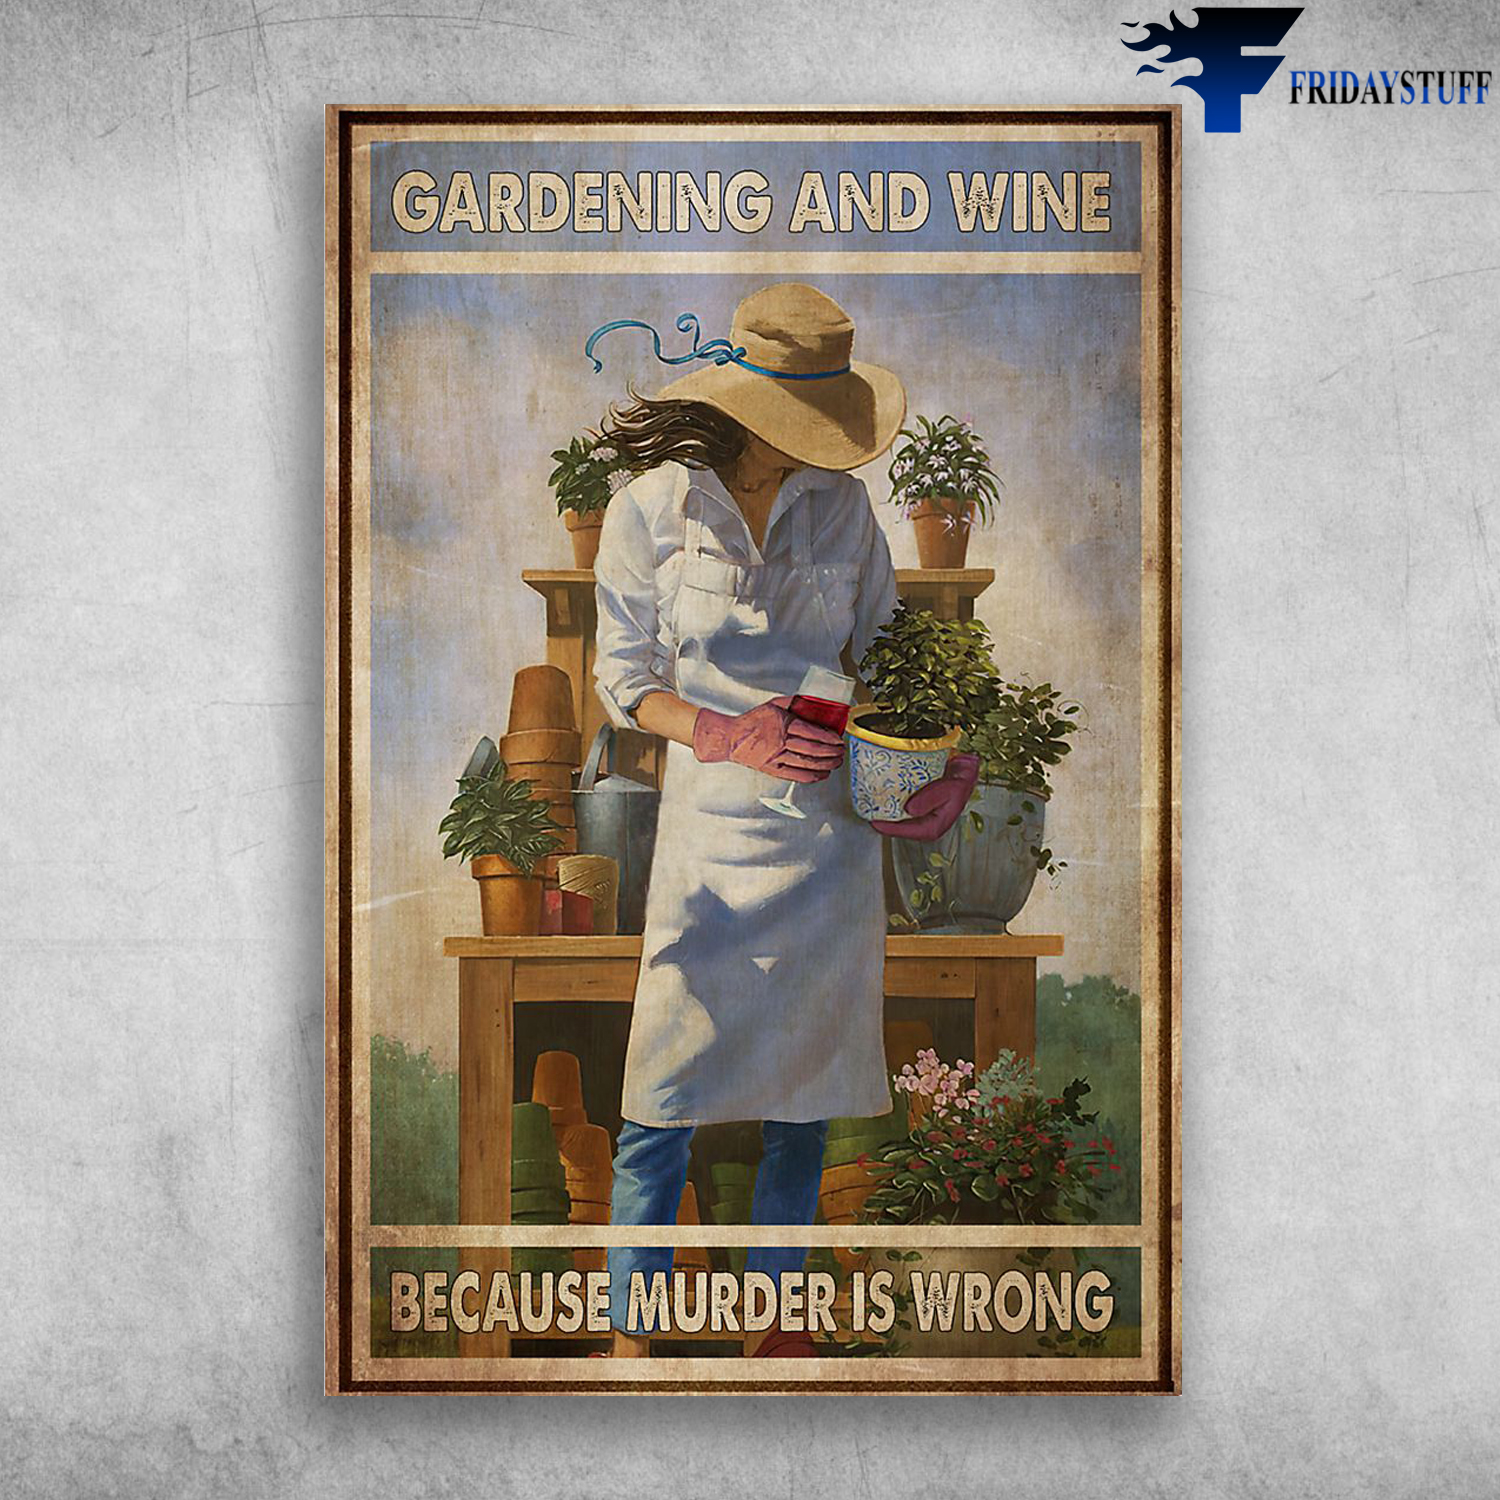 Girl Love Gardening And Wine - Gardening And Wine, Because Murder Is Wrong